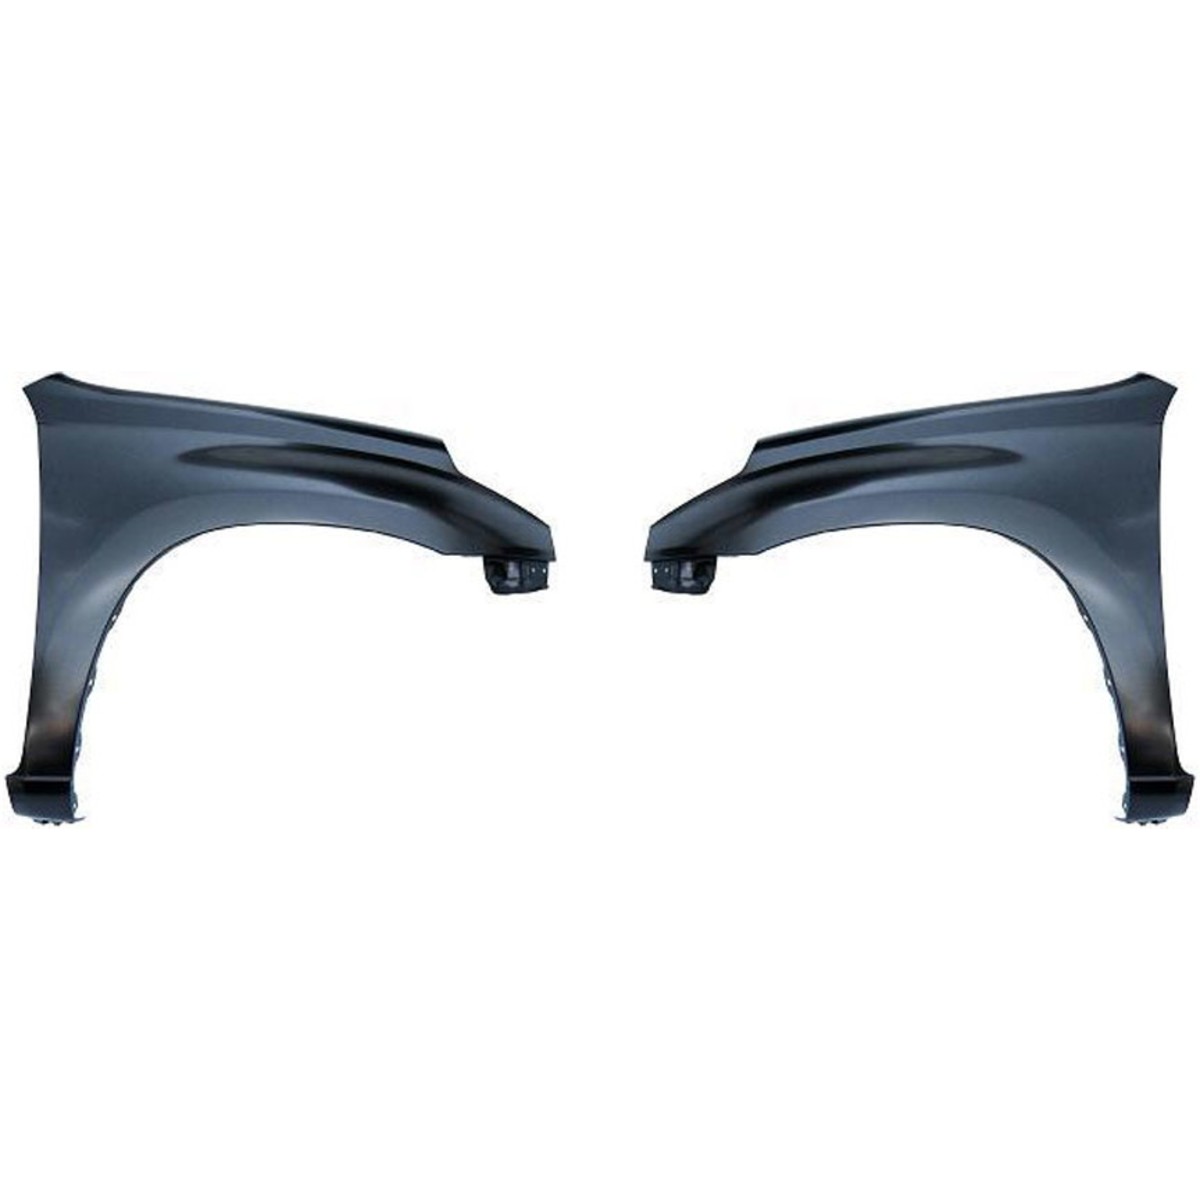 Pair Set of 2 Fenders Front Left-and-Right LH & RH for RAV4 TO1240190 ...